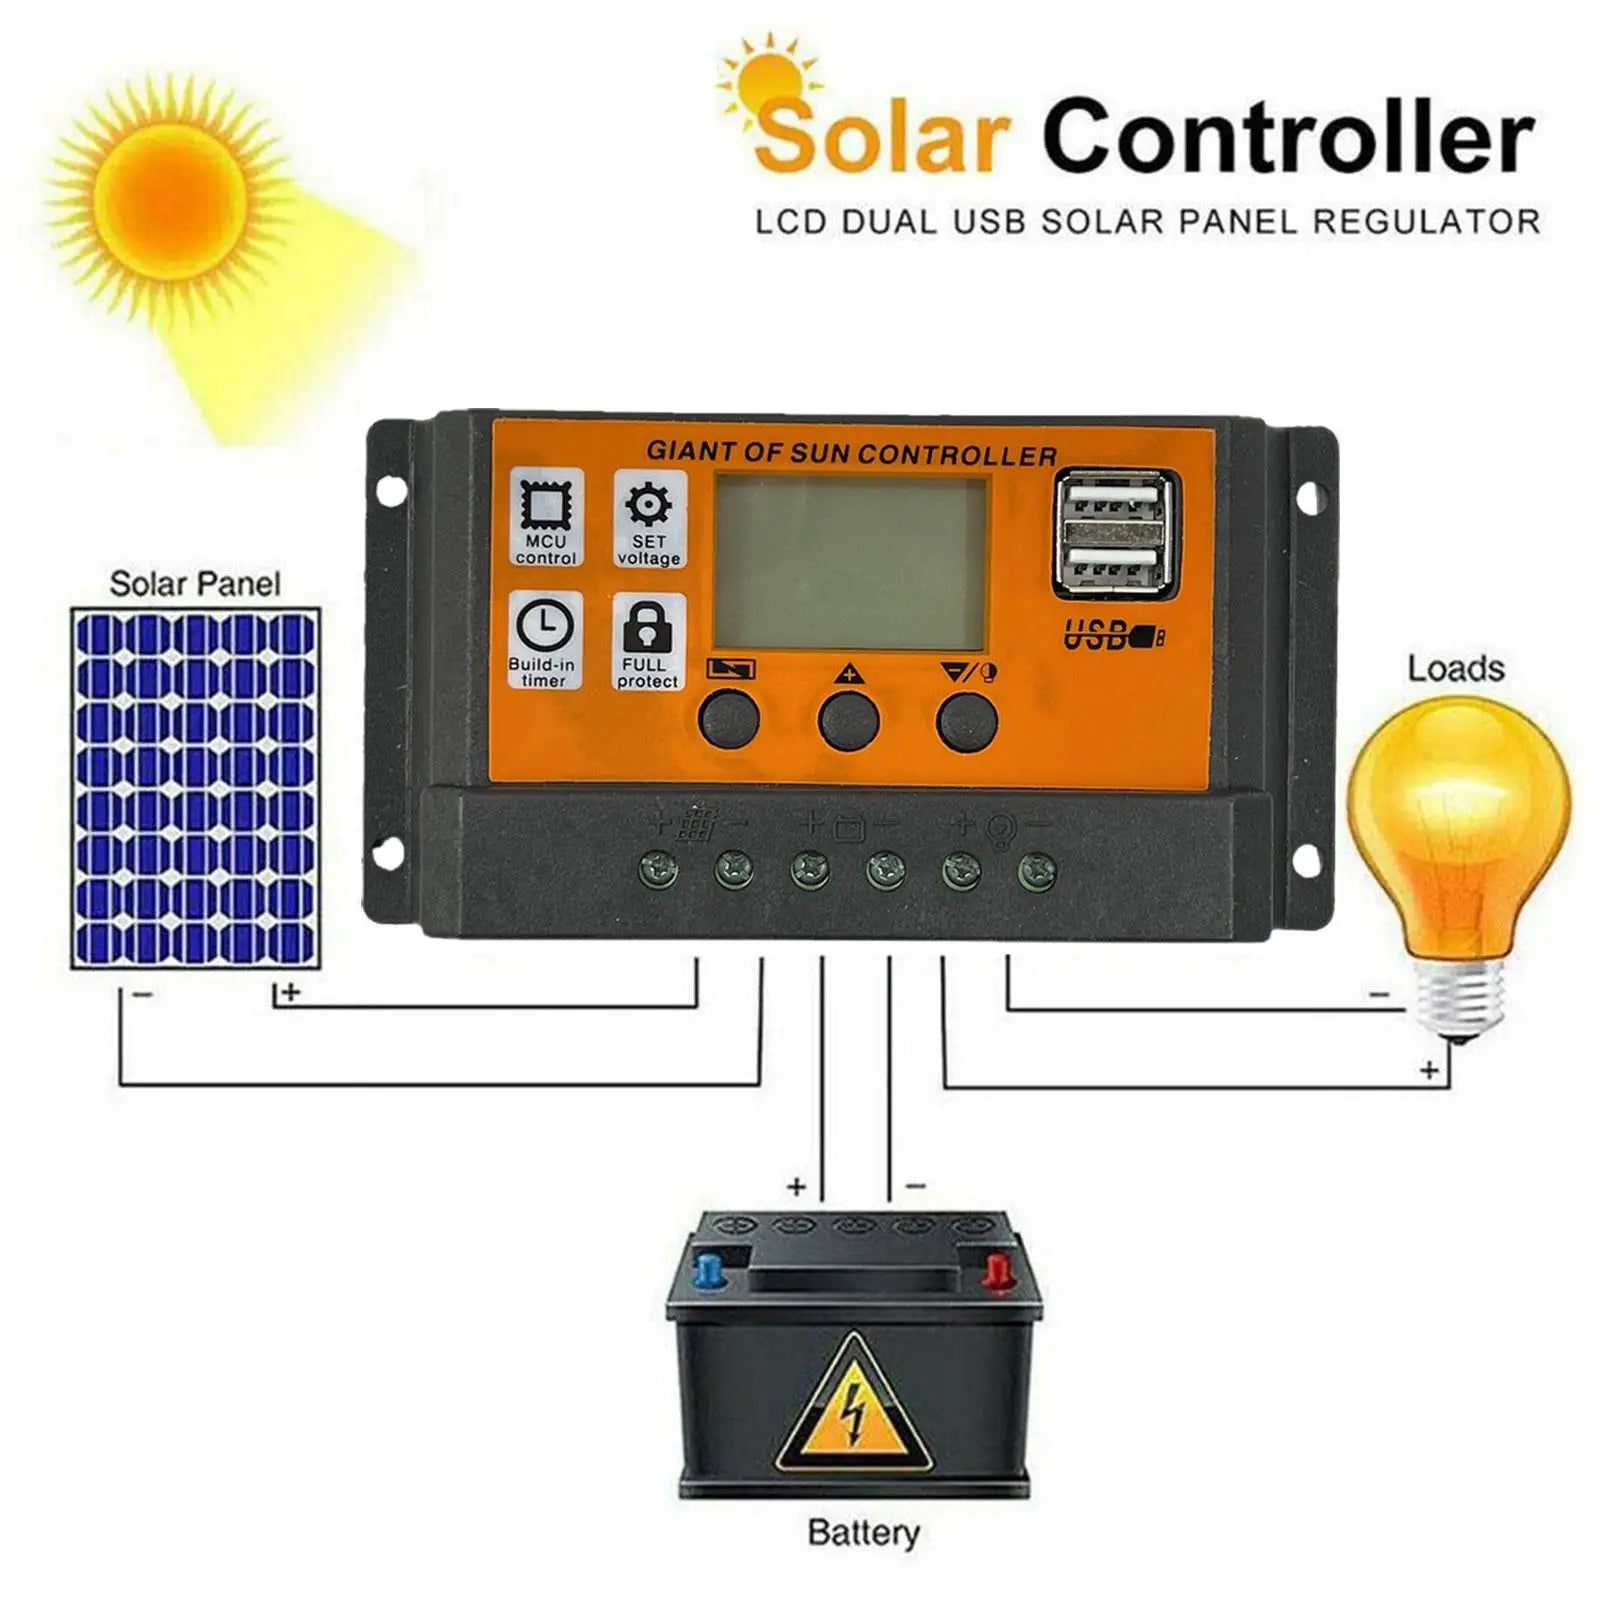 MPPT Solar Charge Controller, Advanced solar charge controller with auto-tracking, LCD display, and safety features.